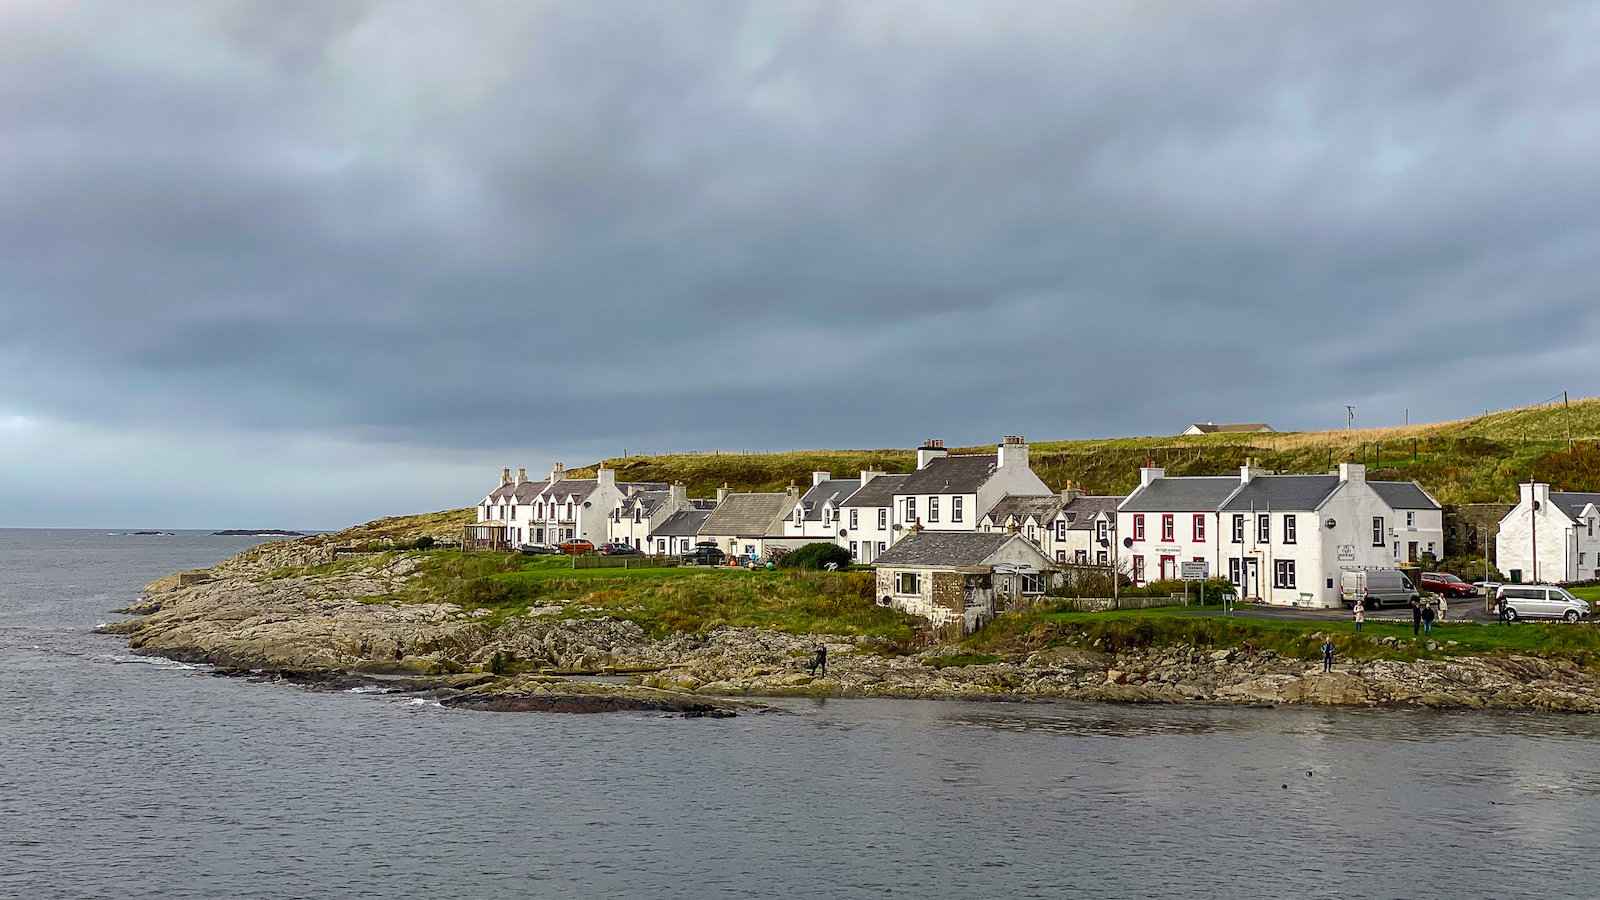 Portnahaven is a beautiful wee town on the Scottish Island of Islay